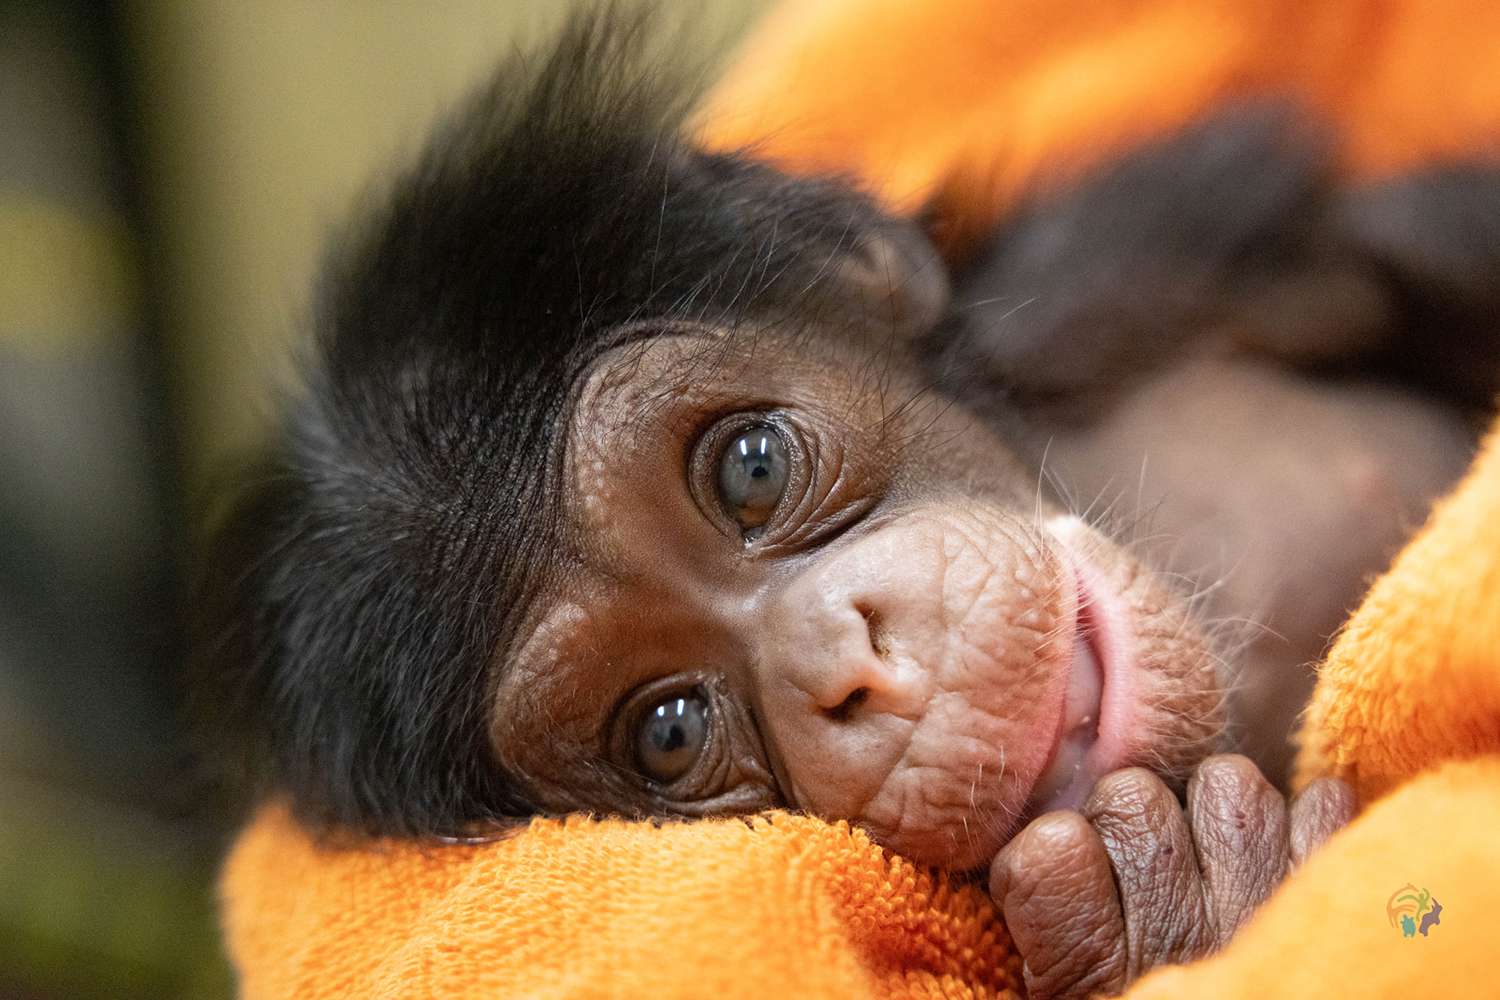 Stevie, the chimpanzee baby born to mother Binti at Zoo Knoxville